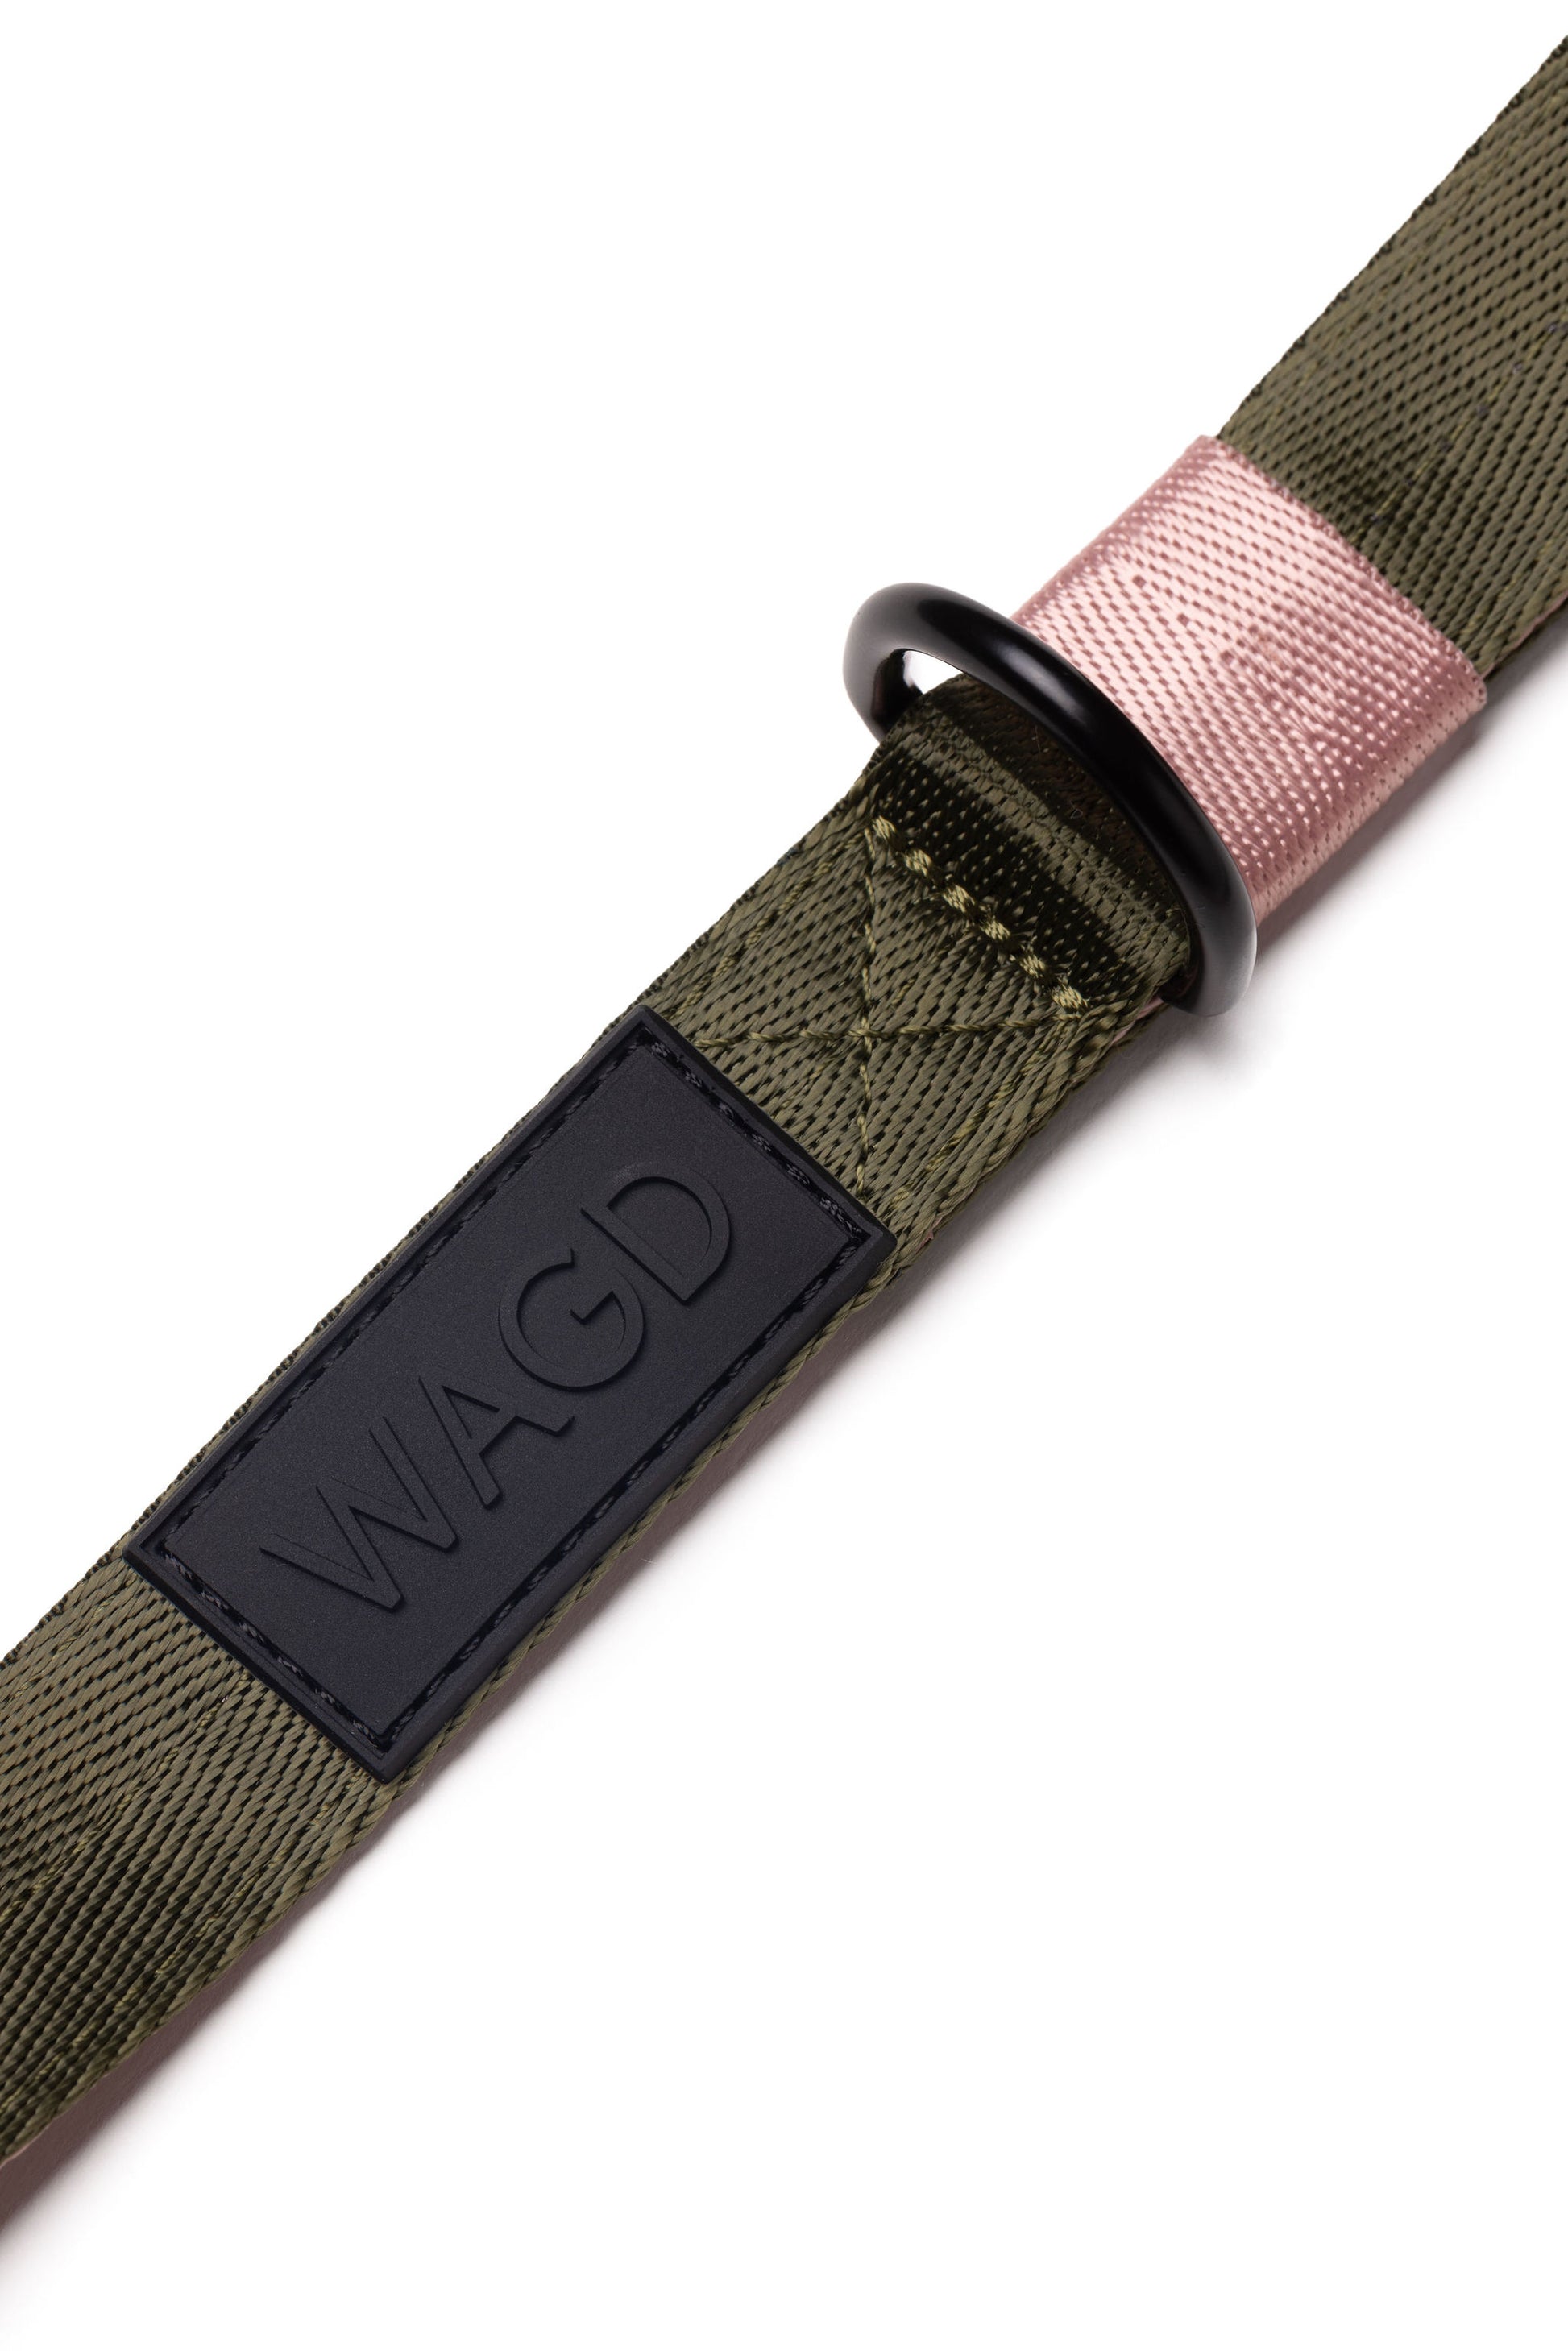 Close up of black rubber WAGD logo on an olive and pink dog lead, under the handle.